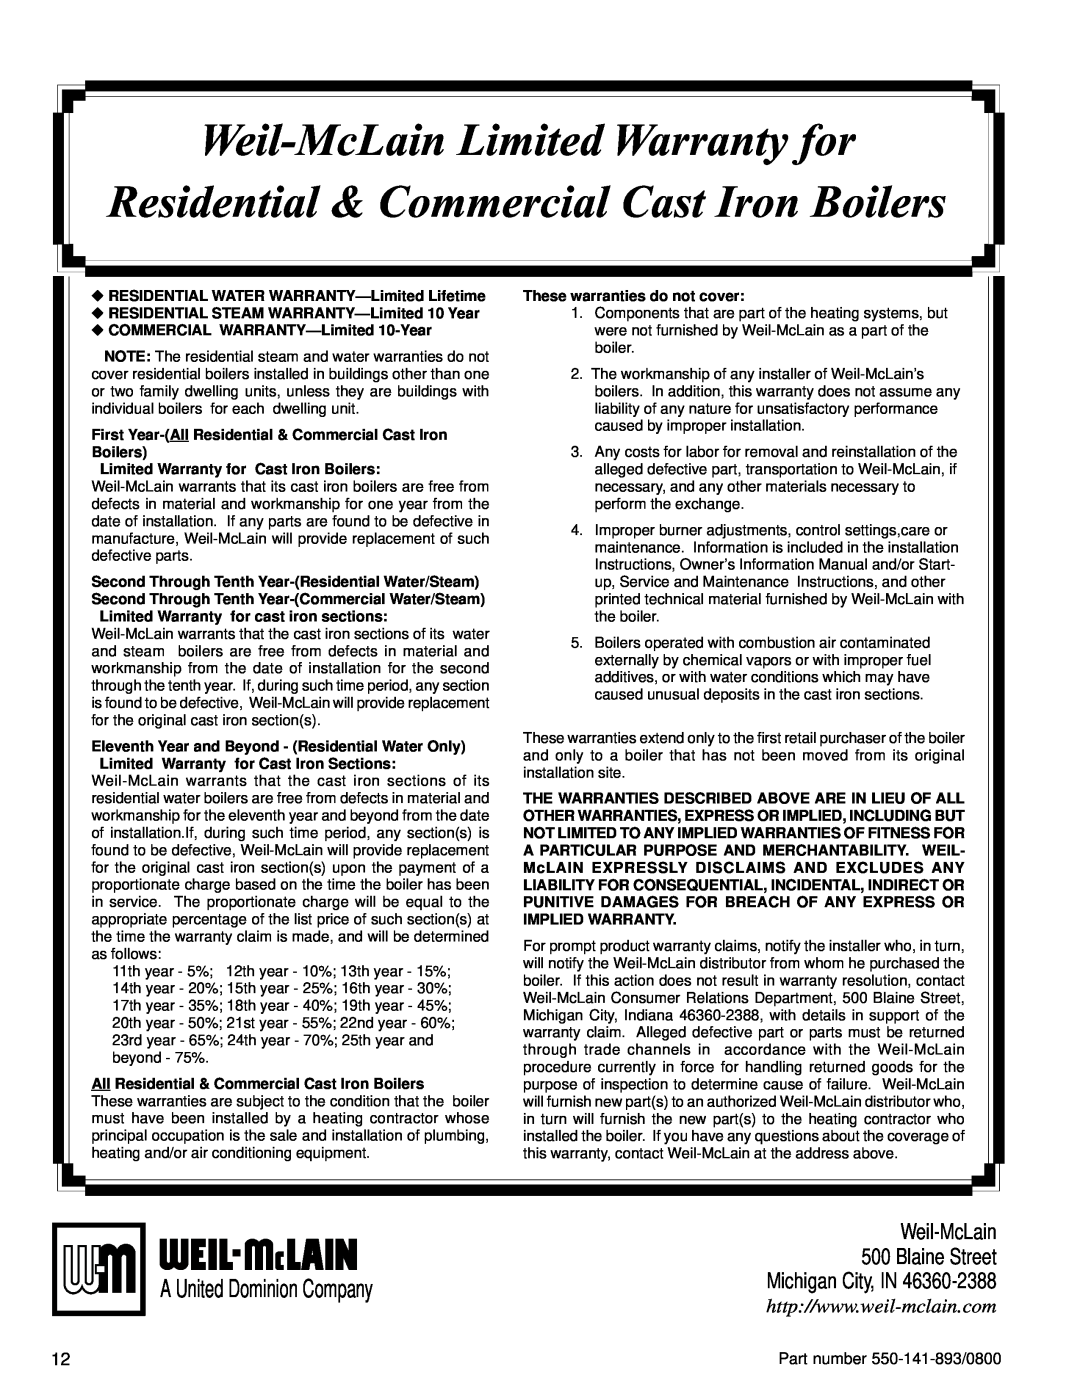 Honeywell Series 4 Weil-McLain Limited Warranty for, Residential & Commercial Cast Iron Boilers, A United Dominion Company 